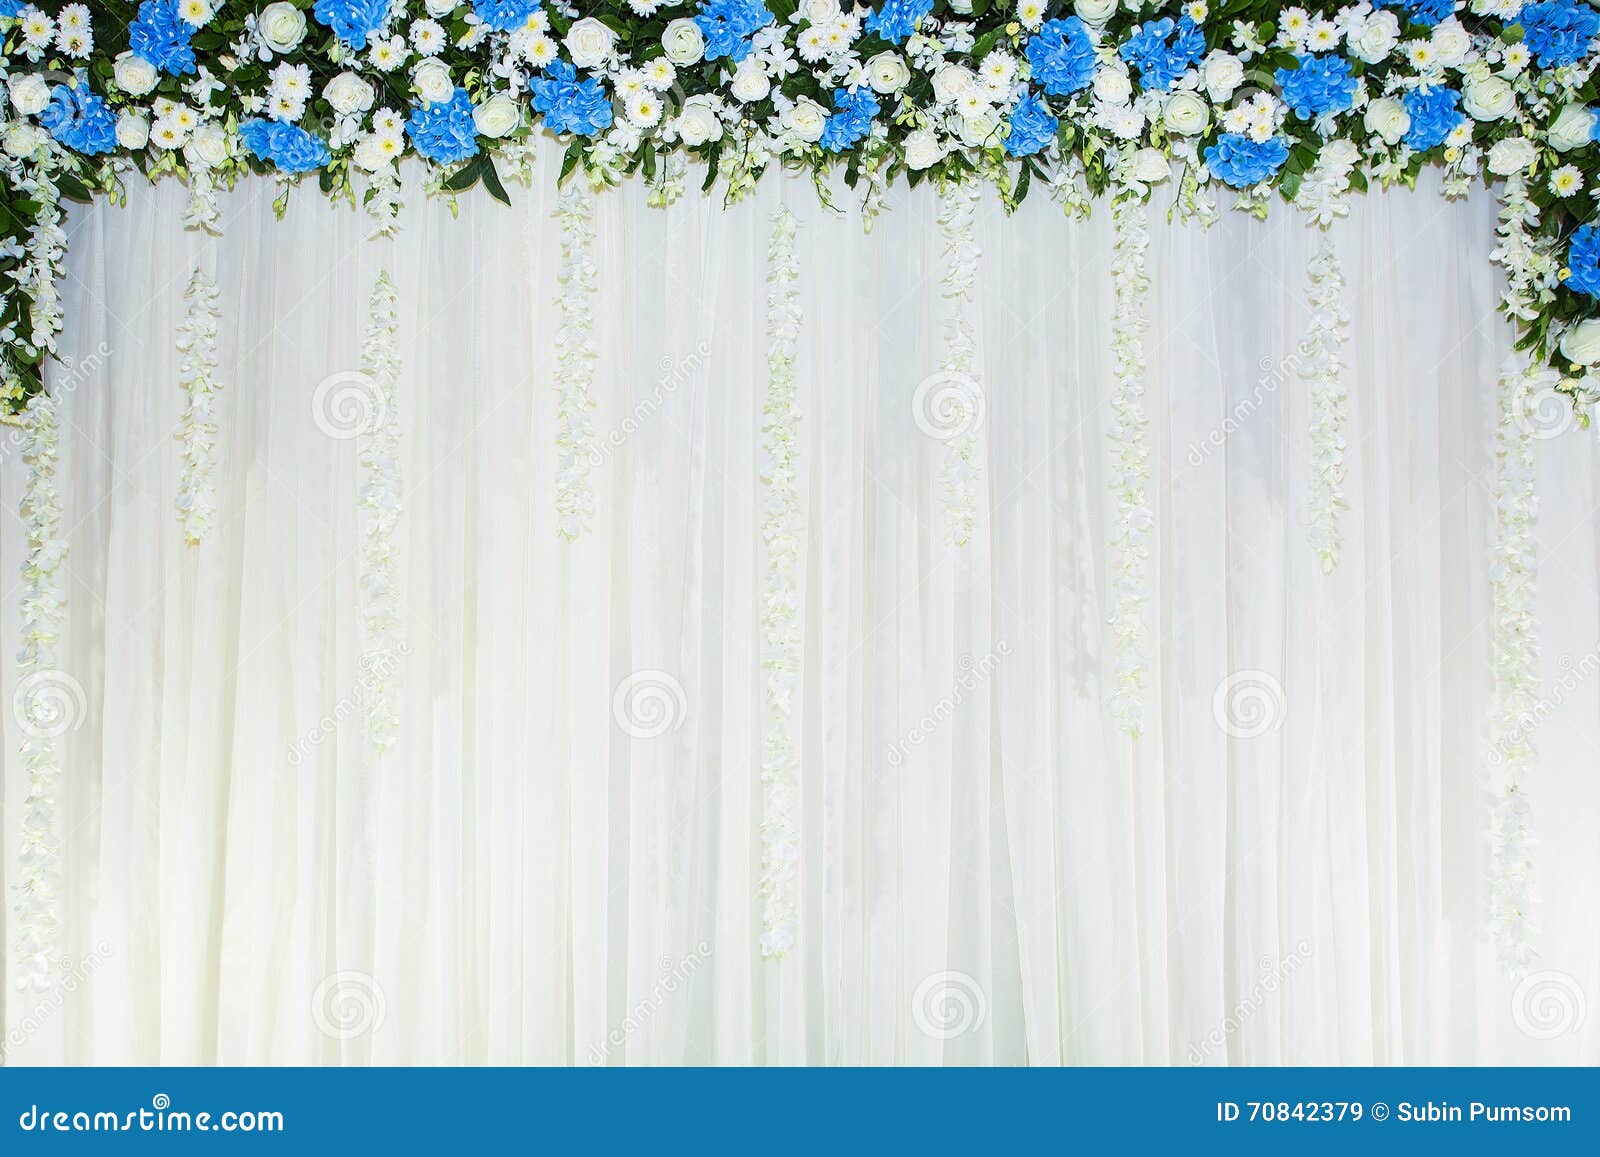 Floral Backdrop with White Cloth Stock Image - Image of leaf, floral ...